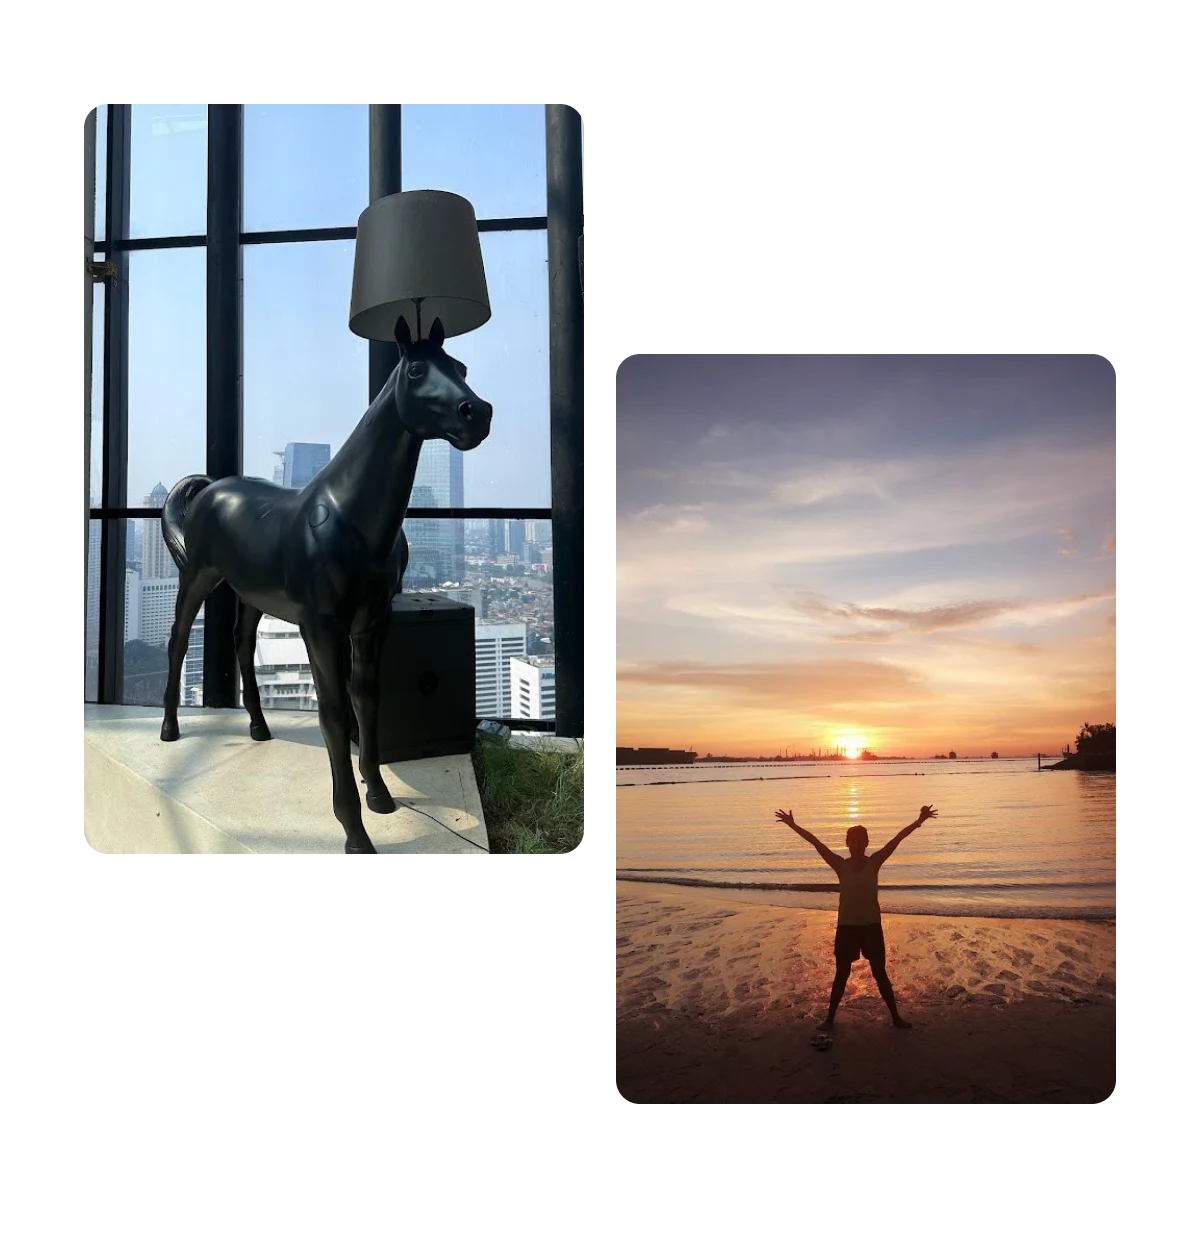 Two pins, lamp with horse statue base, person with arms in air looking at beach sunset